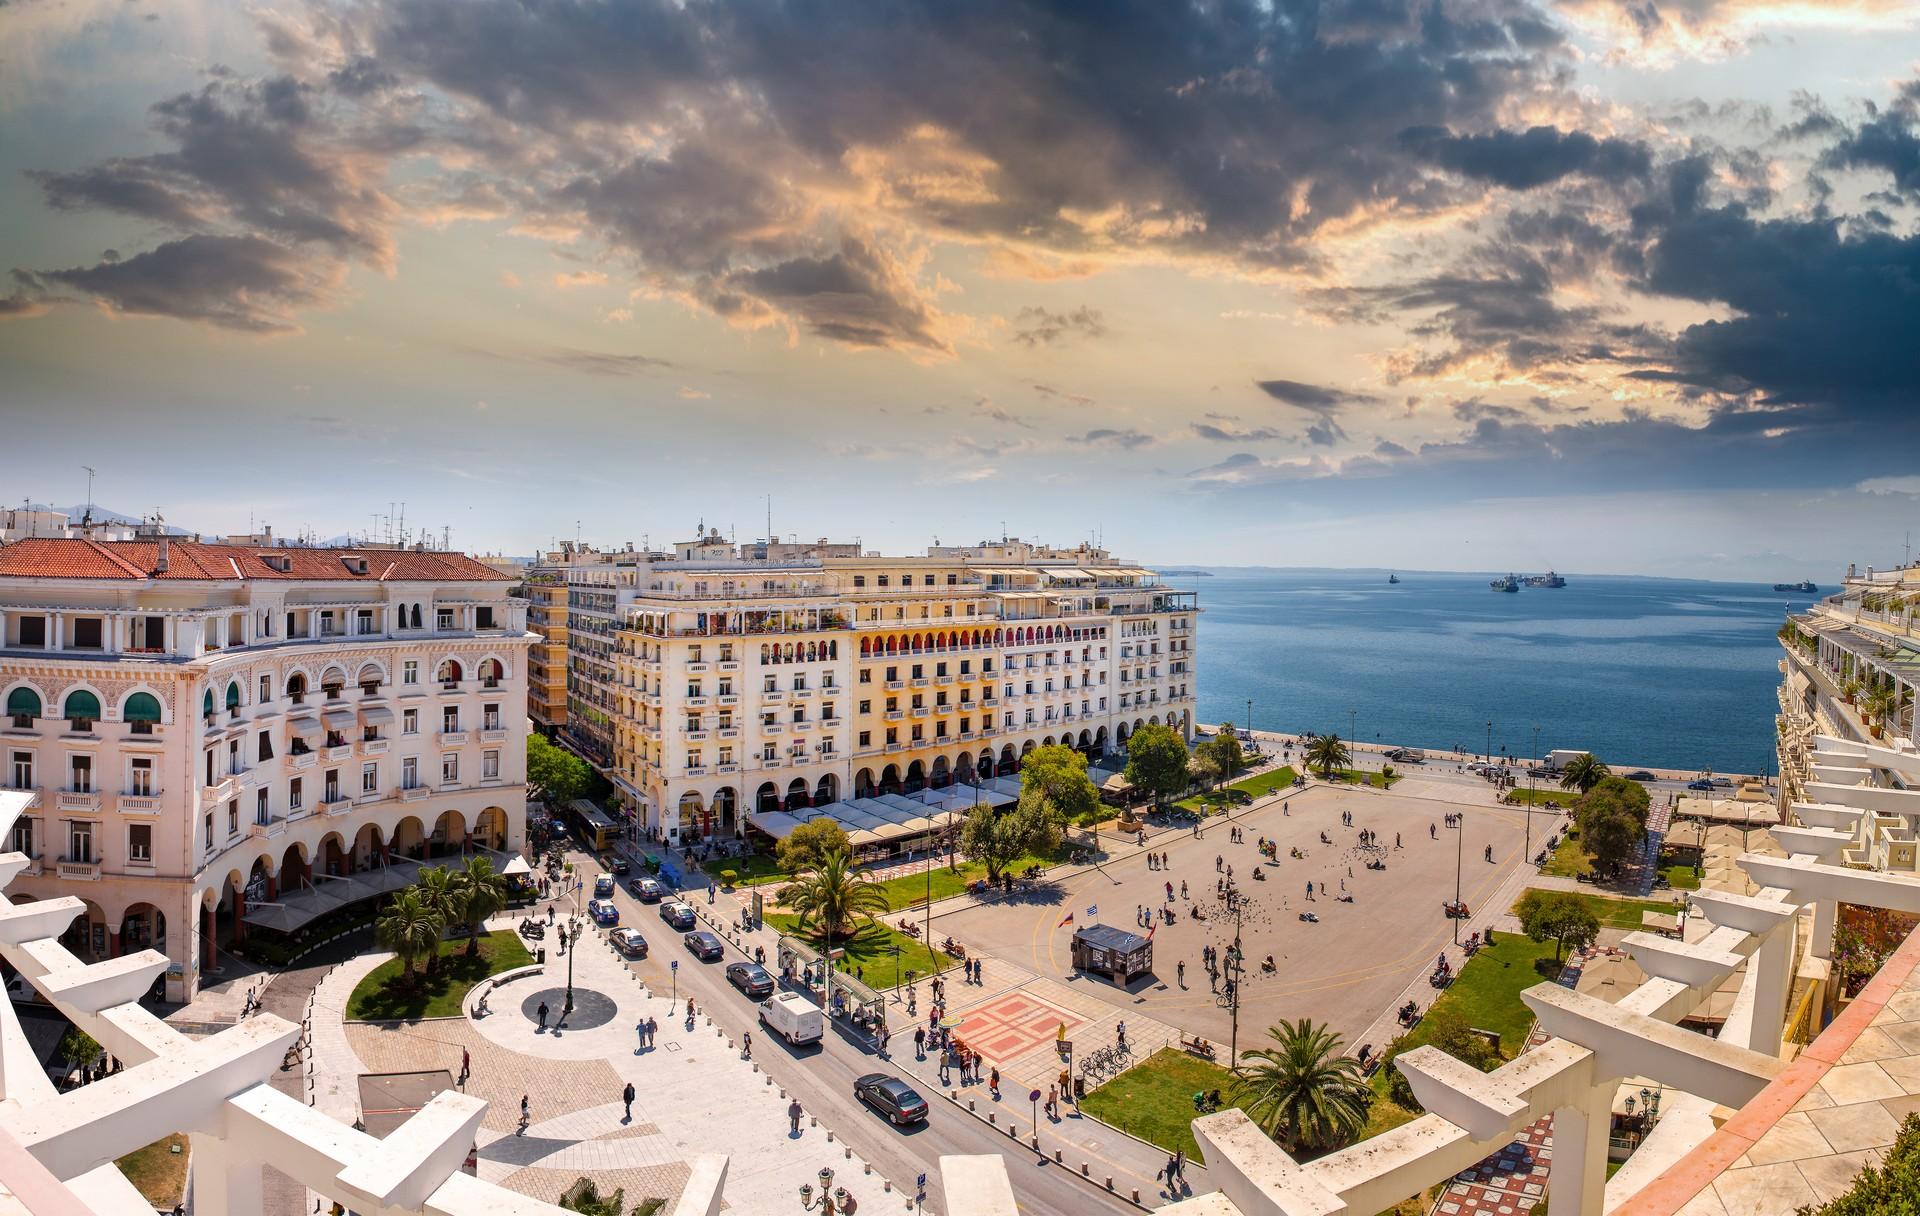 Aerial view of city square in Thessaloniki with cloudy sky